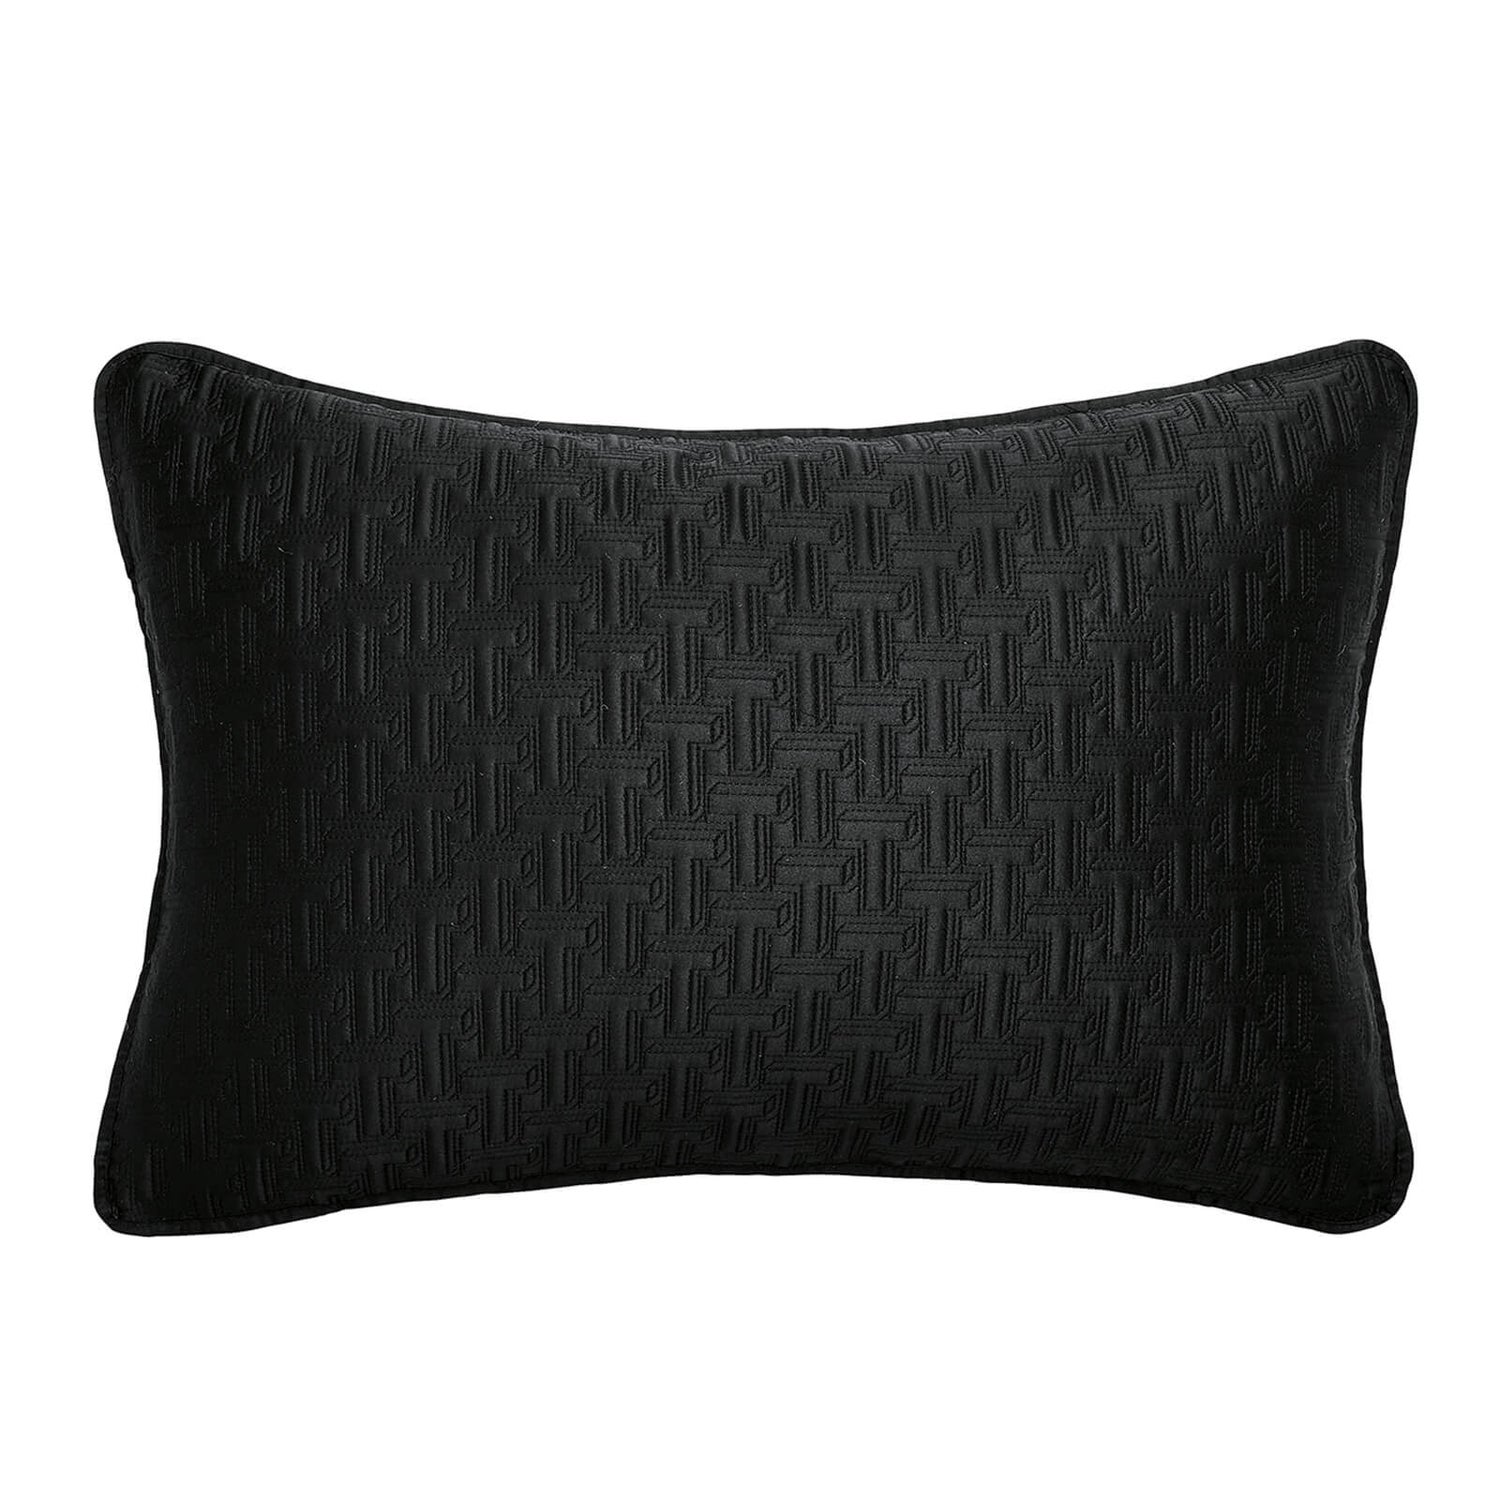 Ted Baker T Quilted Cushion - Black - 60x40cm